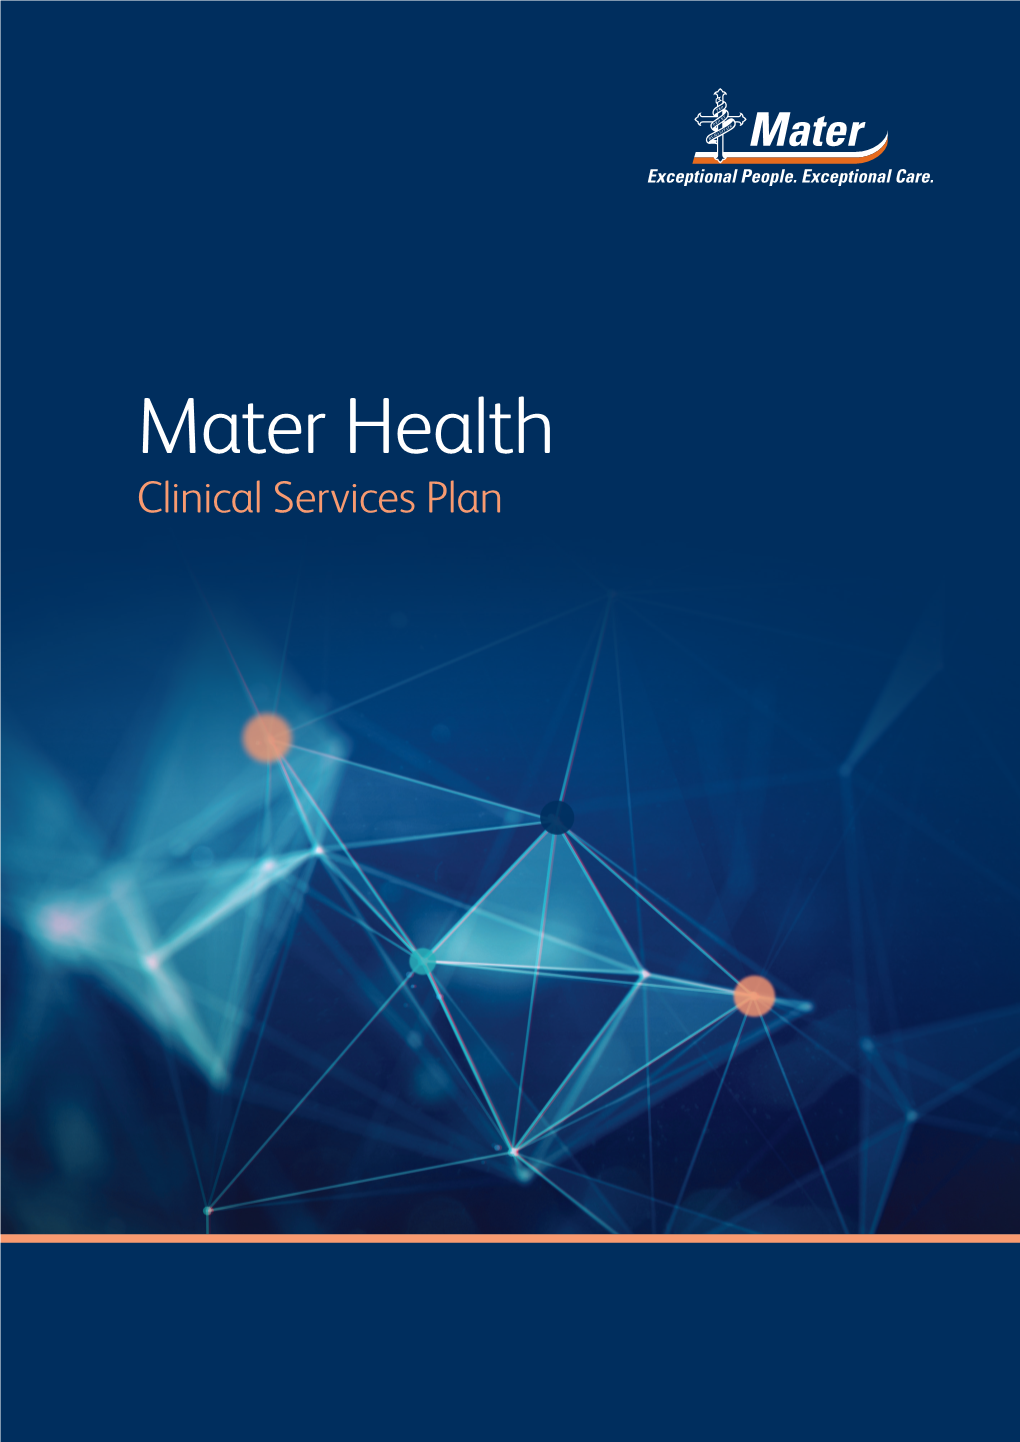 Mater Health Clinical Services Plan